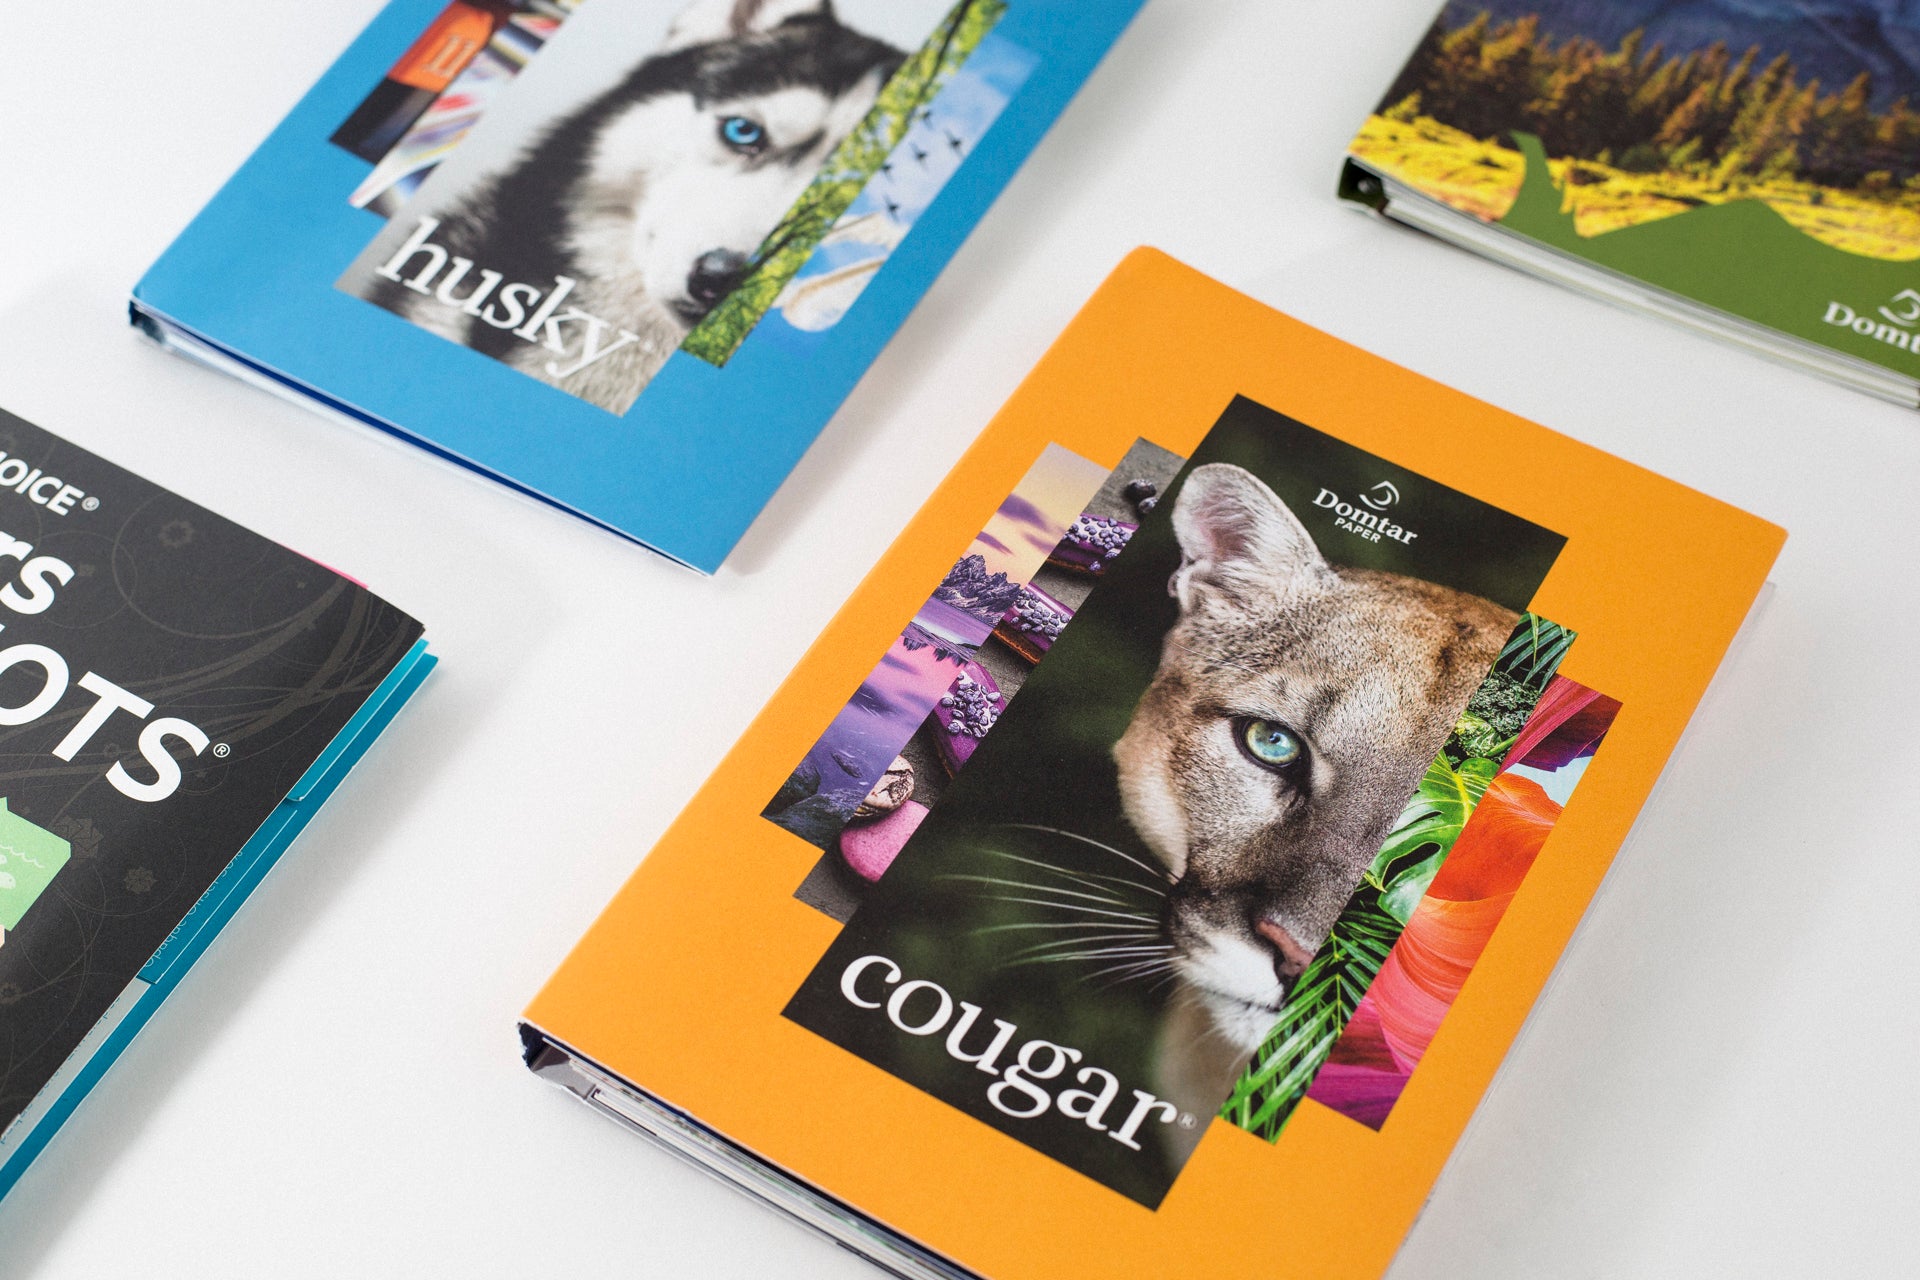 Domtar Swatch Books for Cougar, Husky, Lynx, and Earthchoice